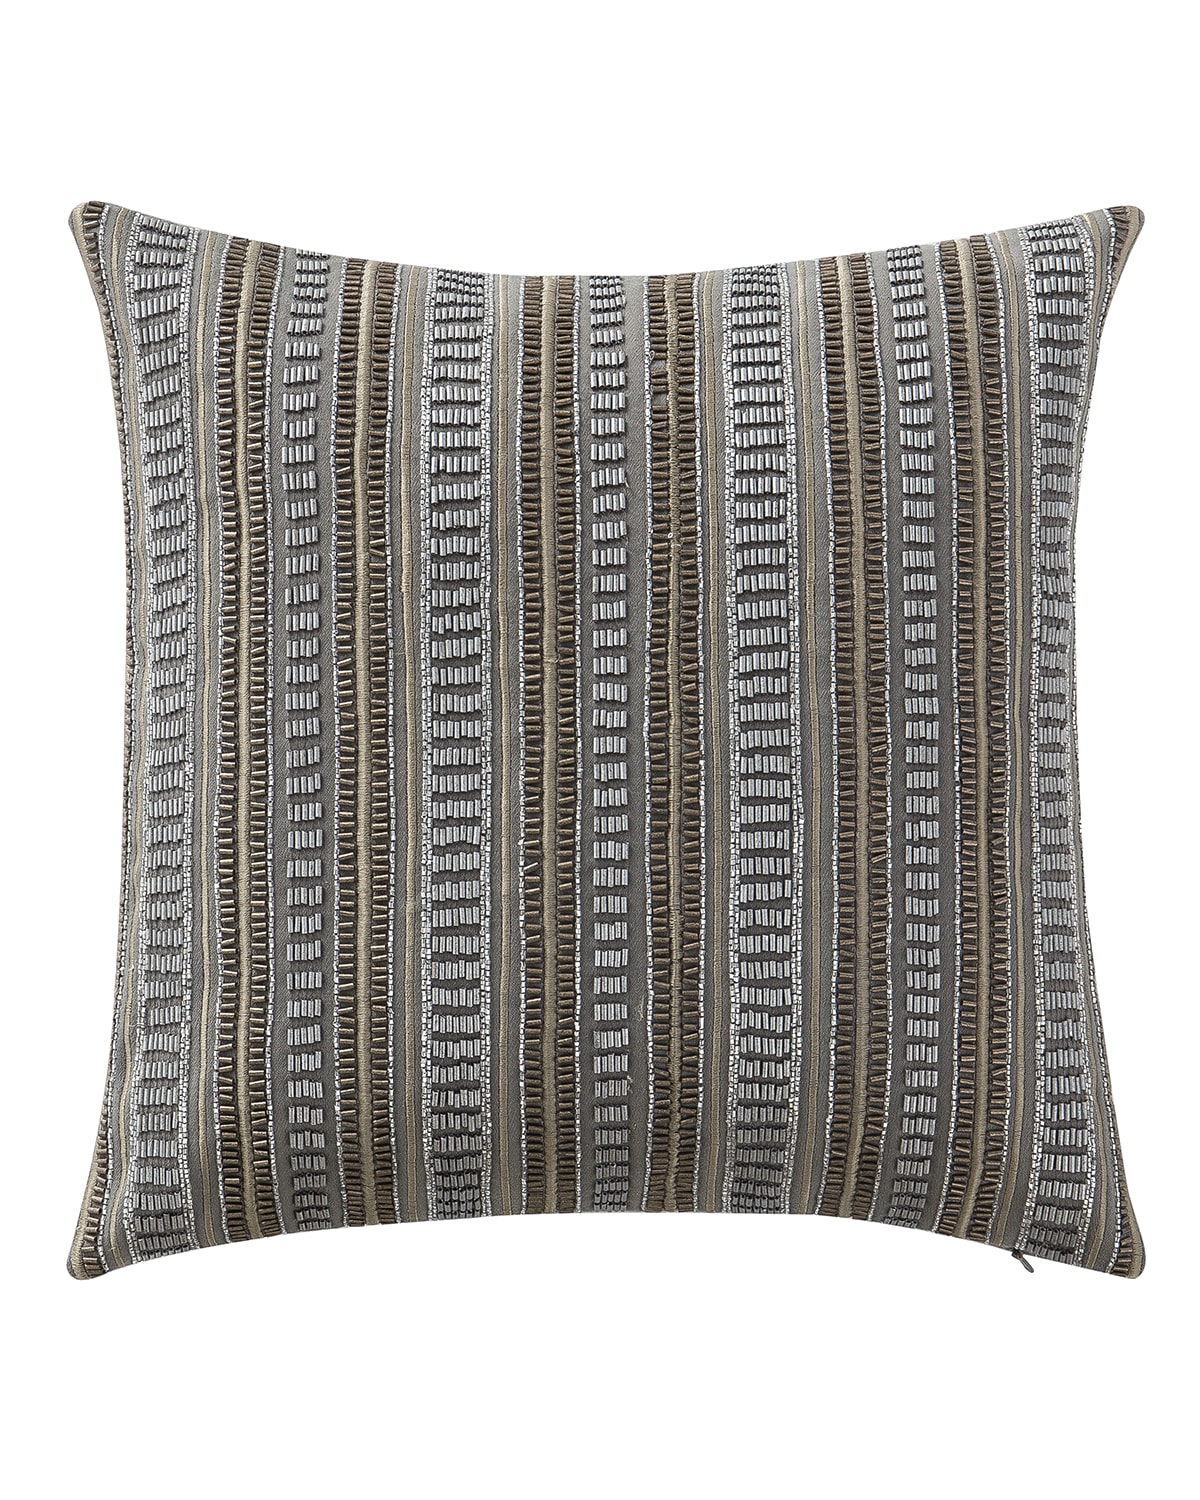 Image Waterford Carrick 14x14 Decorative Pillow